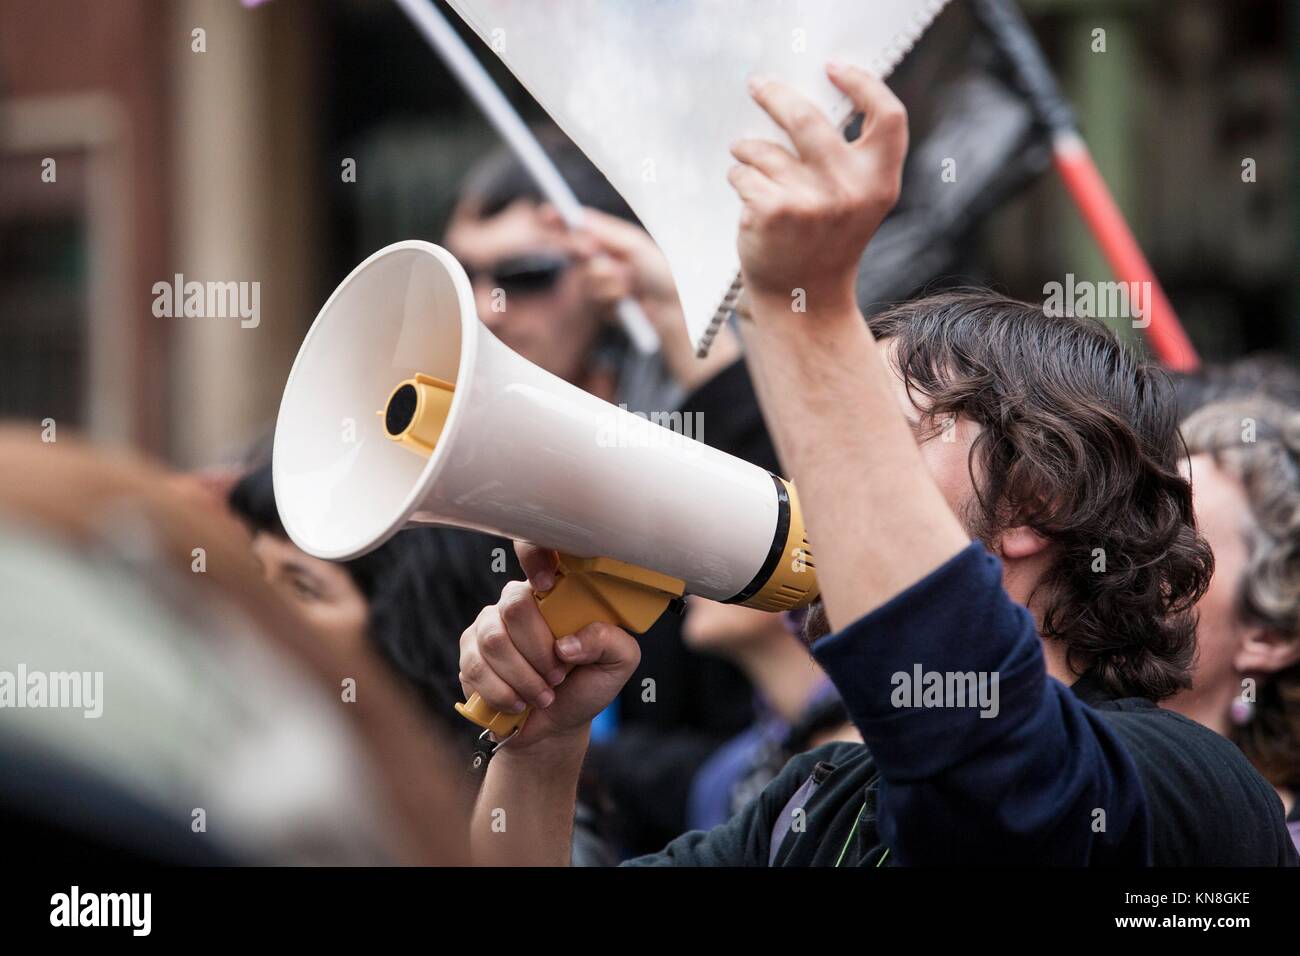 Unidentified young demostrator with megaphone and notebook protesting against austerity cuts. Stock Photo